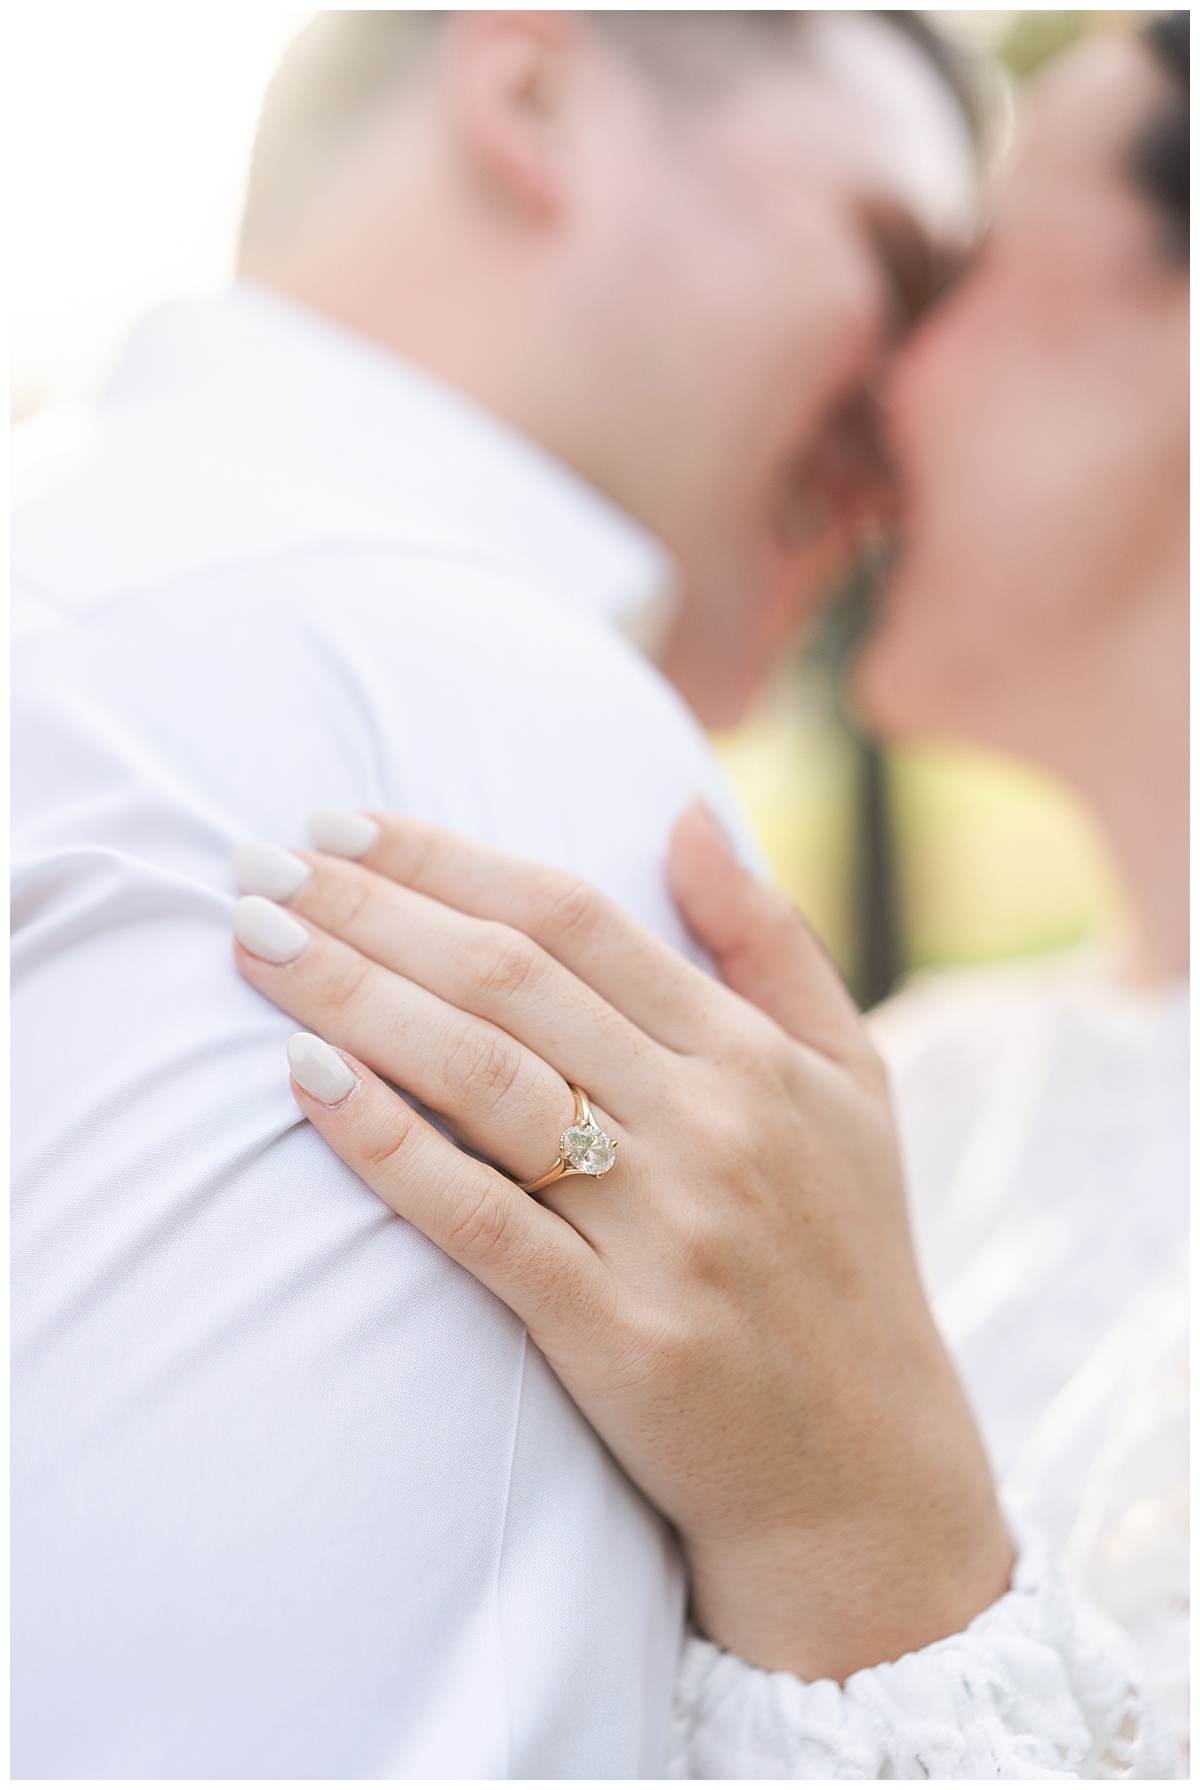 Stunning engagement ring during their Eleanor Tinsley Park Engagement Session